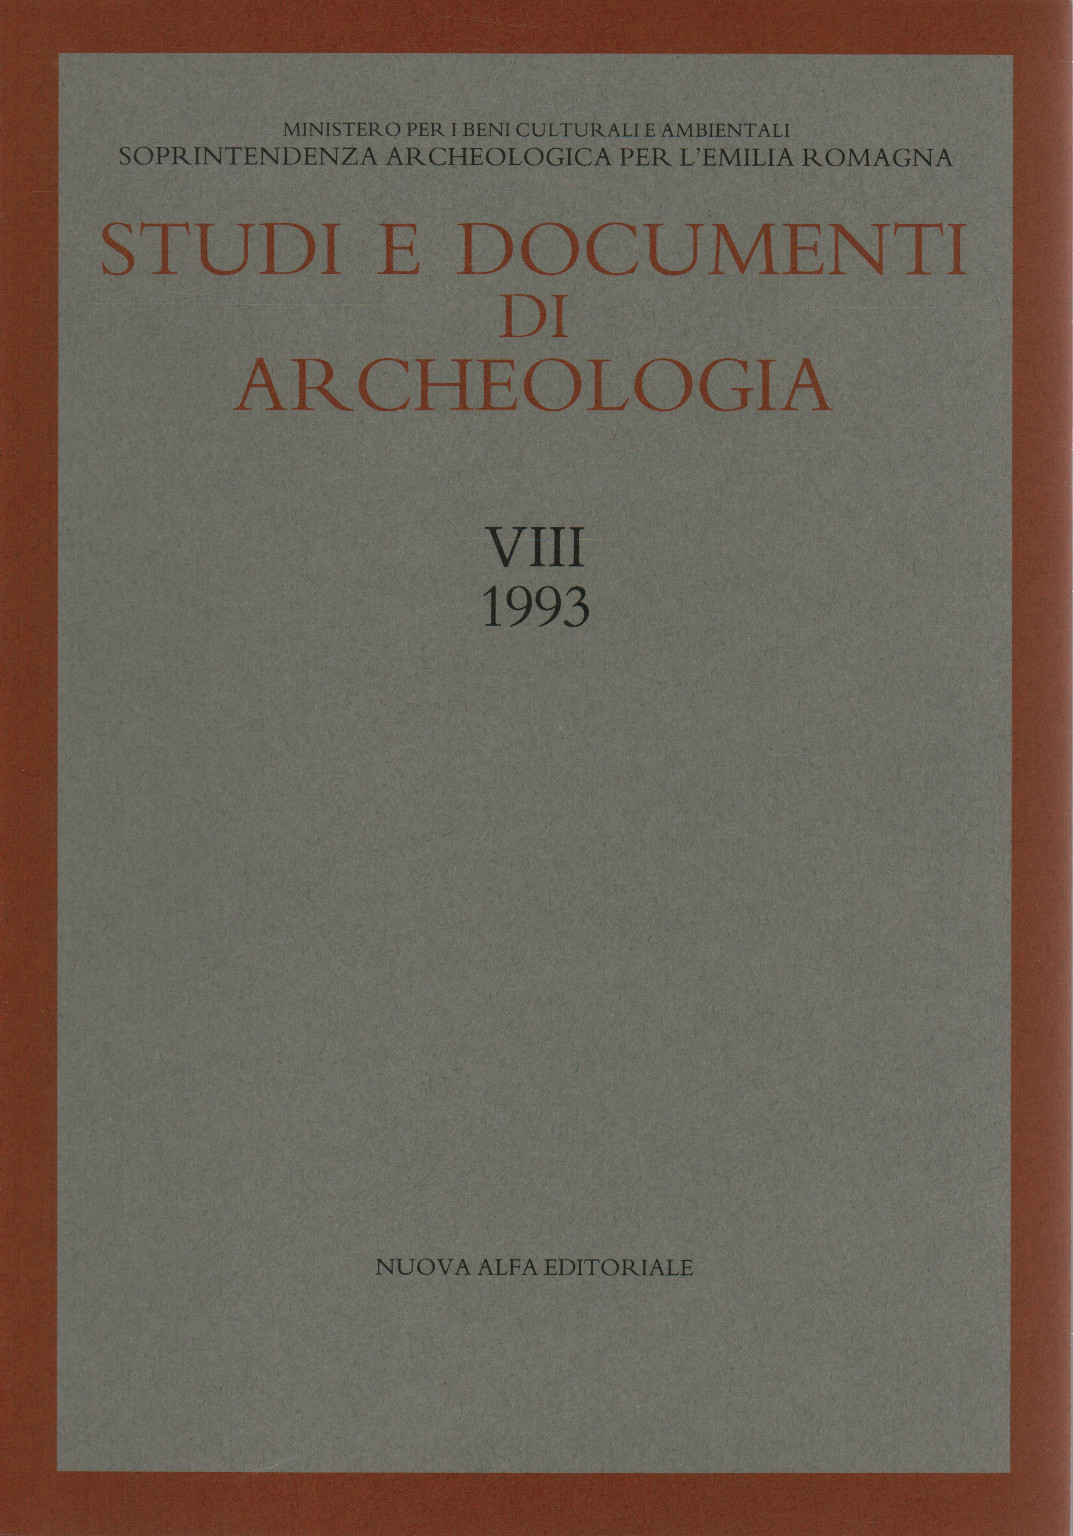 Archaeological studies and documents. Vol. VIII (1993), s.a.